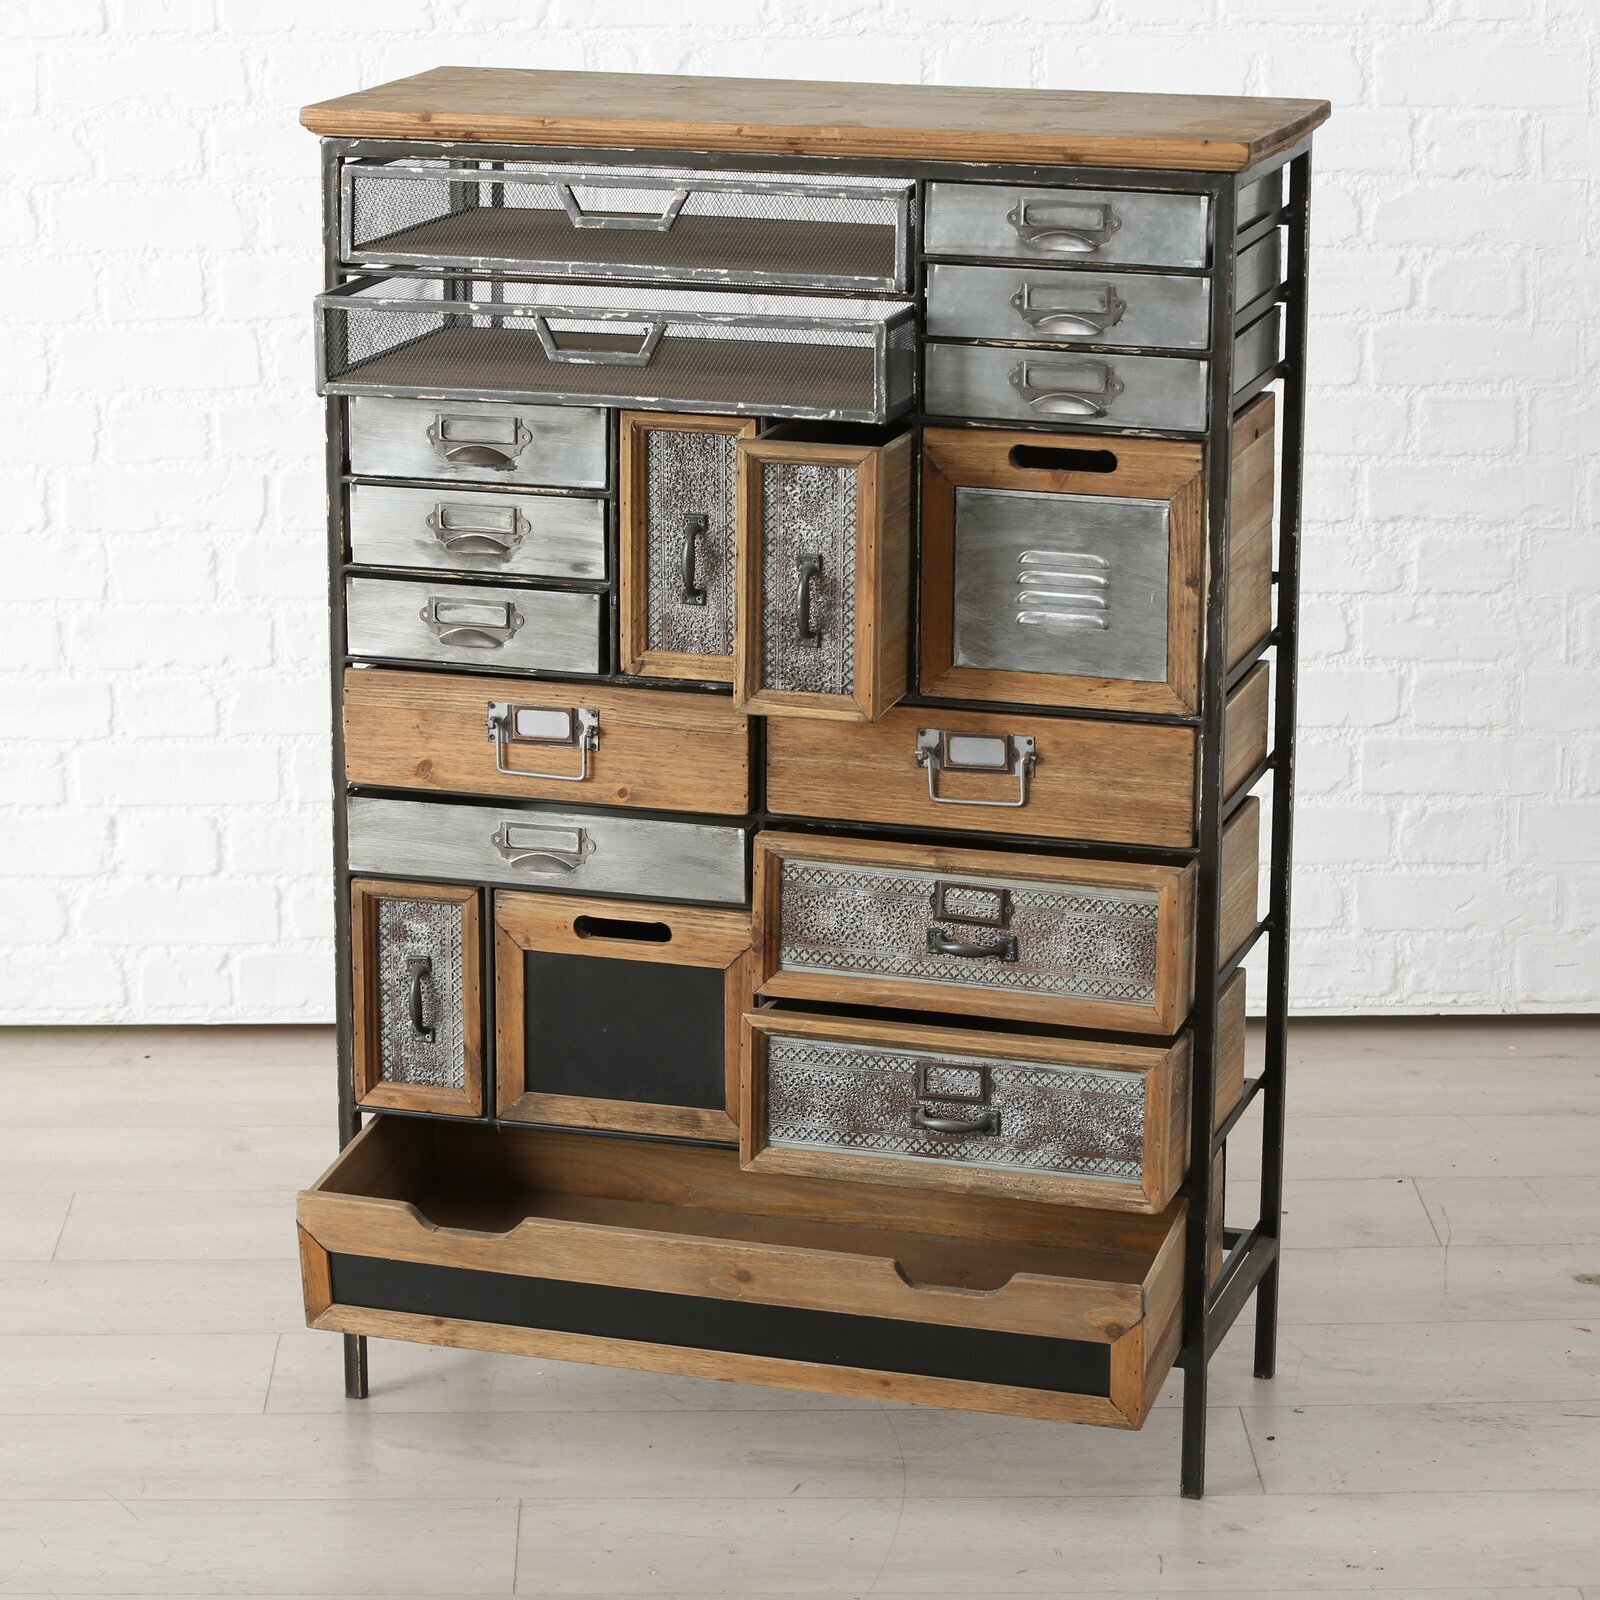 Cabinet with shallow drawers in different materials